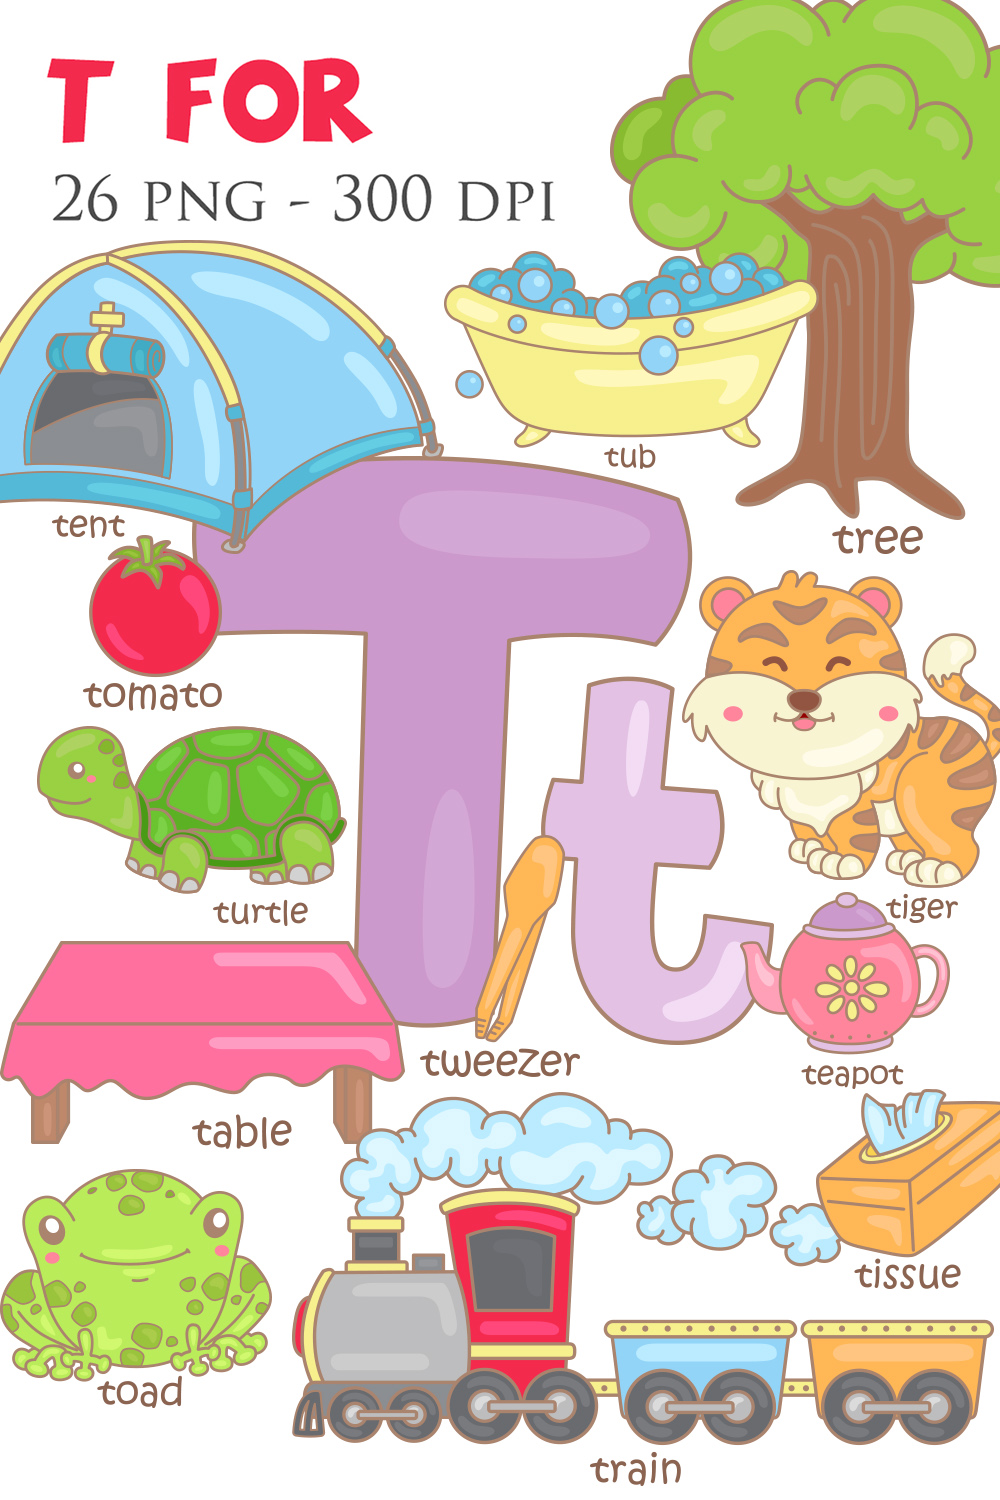 Alphabet T For Vocabulary School Letter Reading Writing Font Study Learning Student Toodler Kids Cartoon Lesson Tomato Tent Tub Tissue Turtle Train Tree Teapot Tiger Tweezer Table Toad Illustration Vector Clipart Cartoon pinterest preview image.